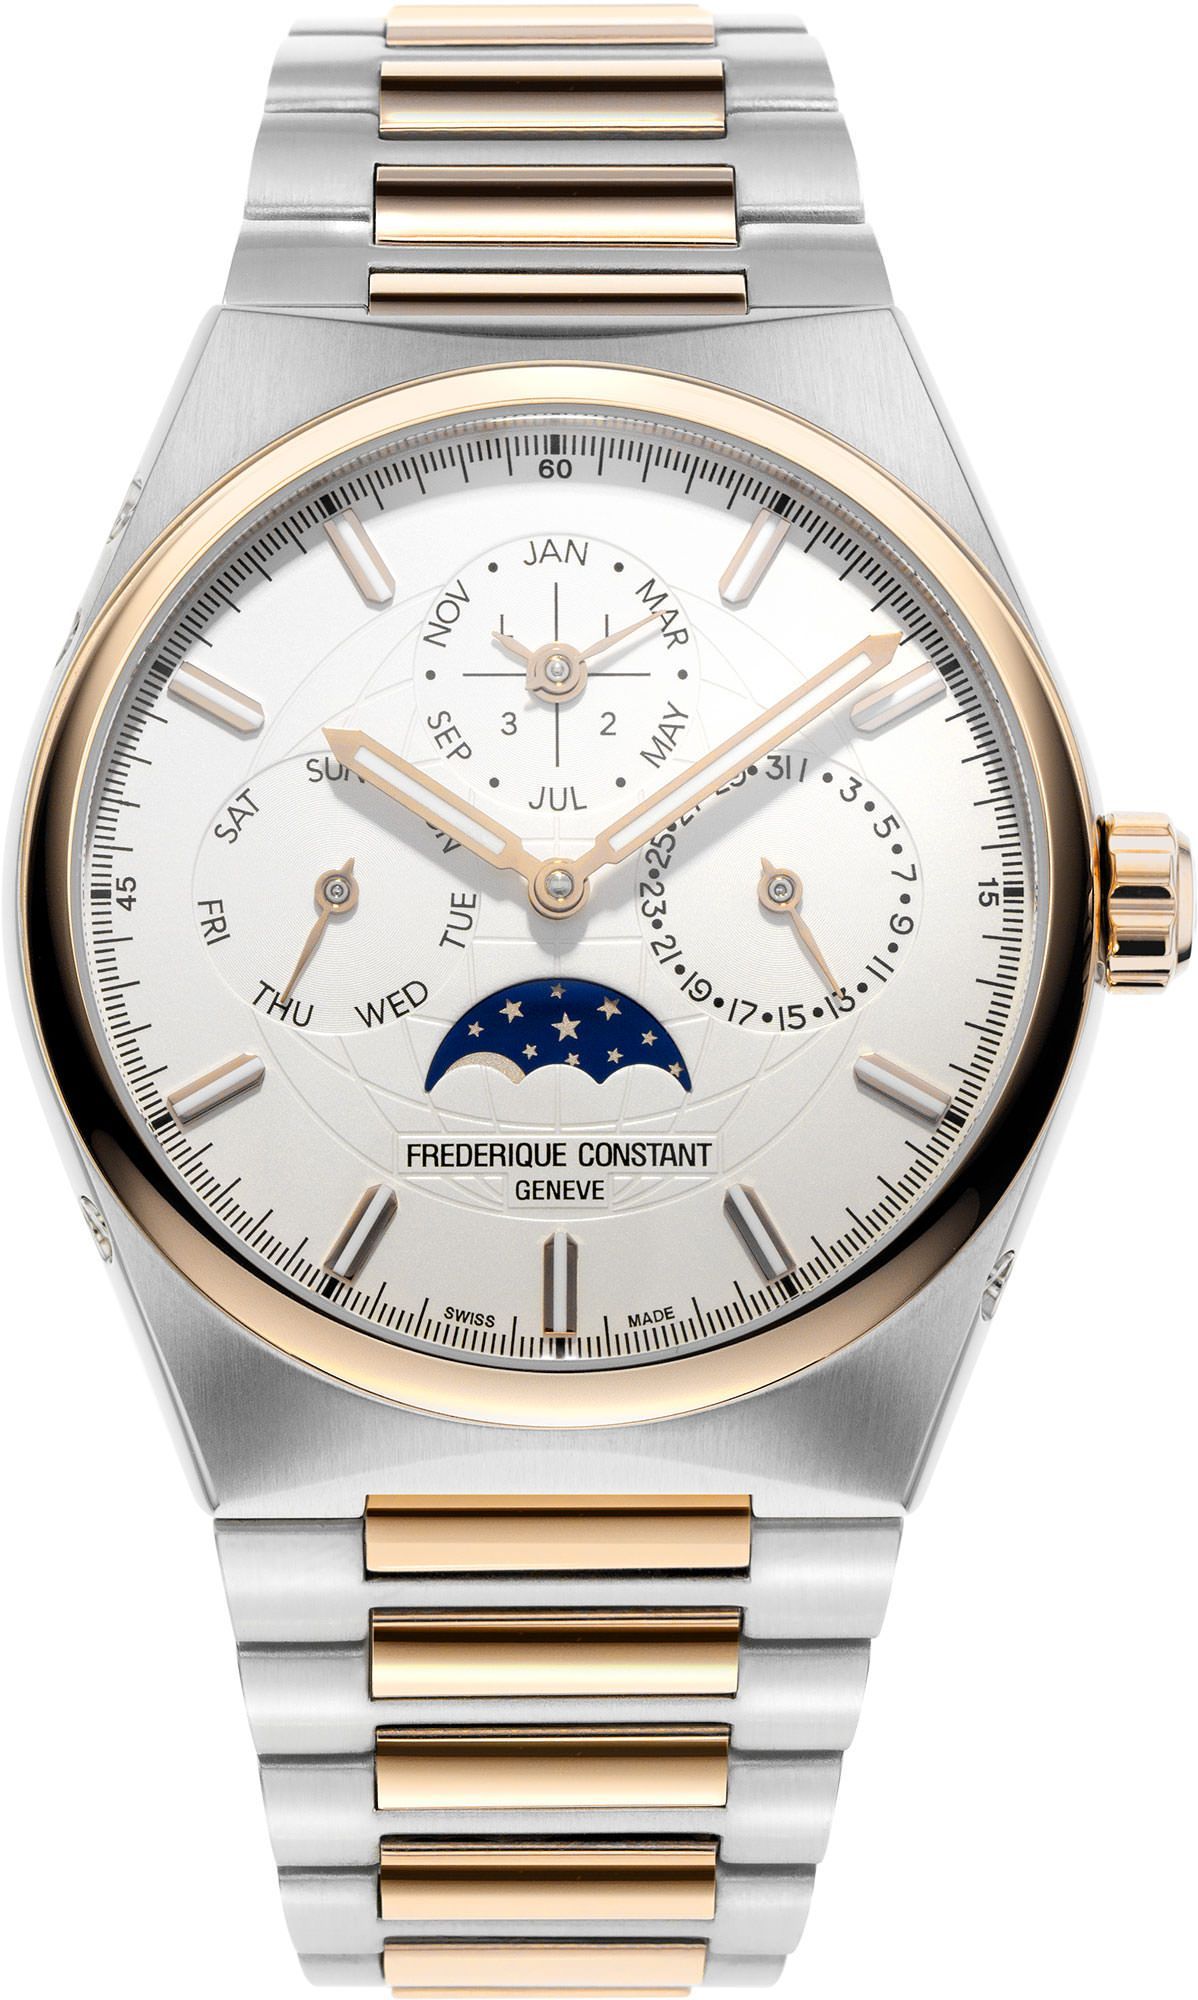 Frederique Constant Highlife Perpetual Calendar Manufacture 41 mm Watch in Silver Dial For Men - 1